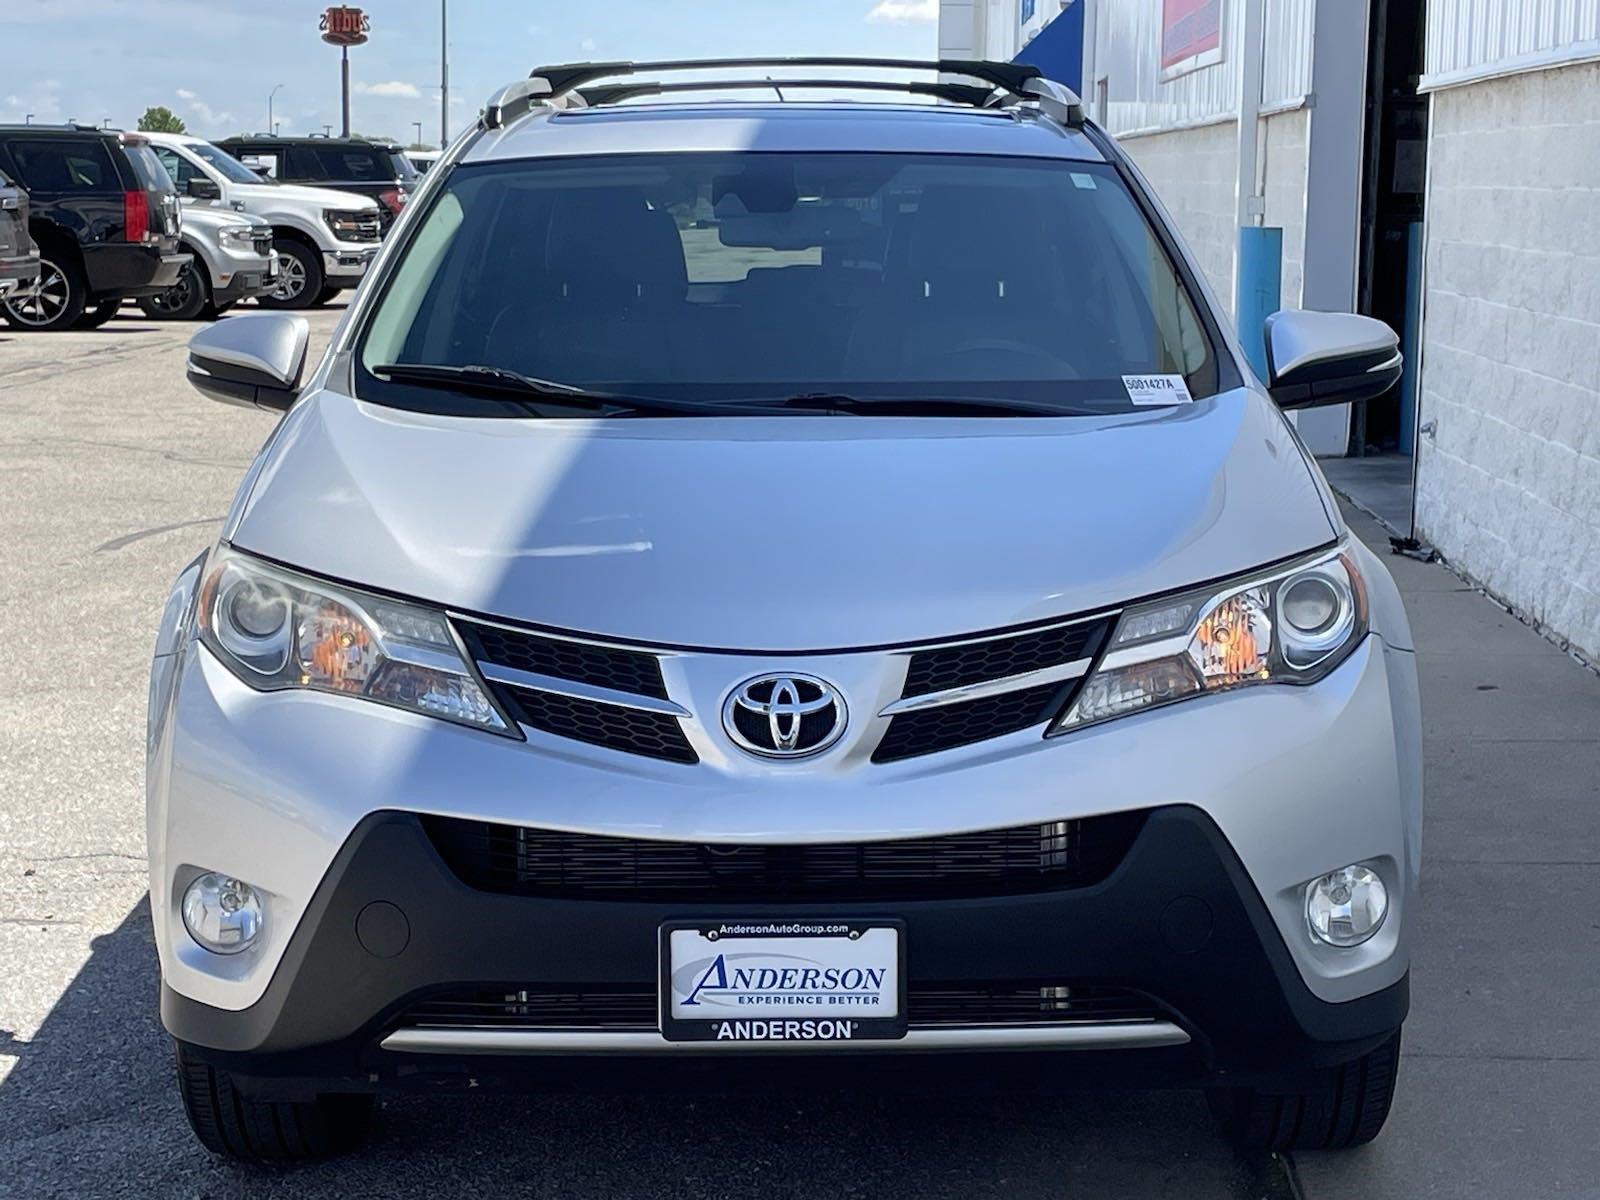 Used 2015 Toyota RAV4 Limited Sport Utility for sale in Lincoln NE